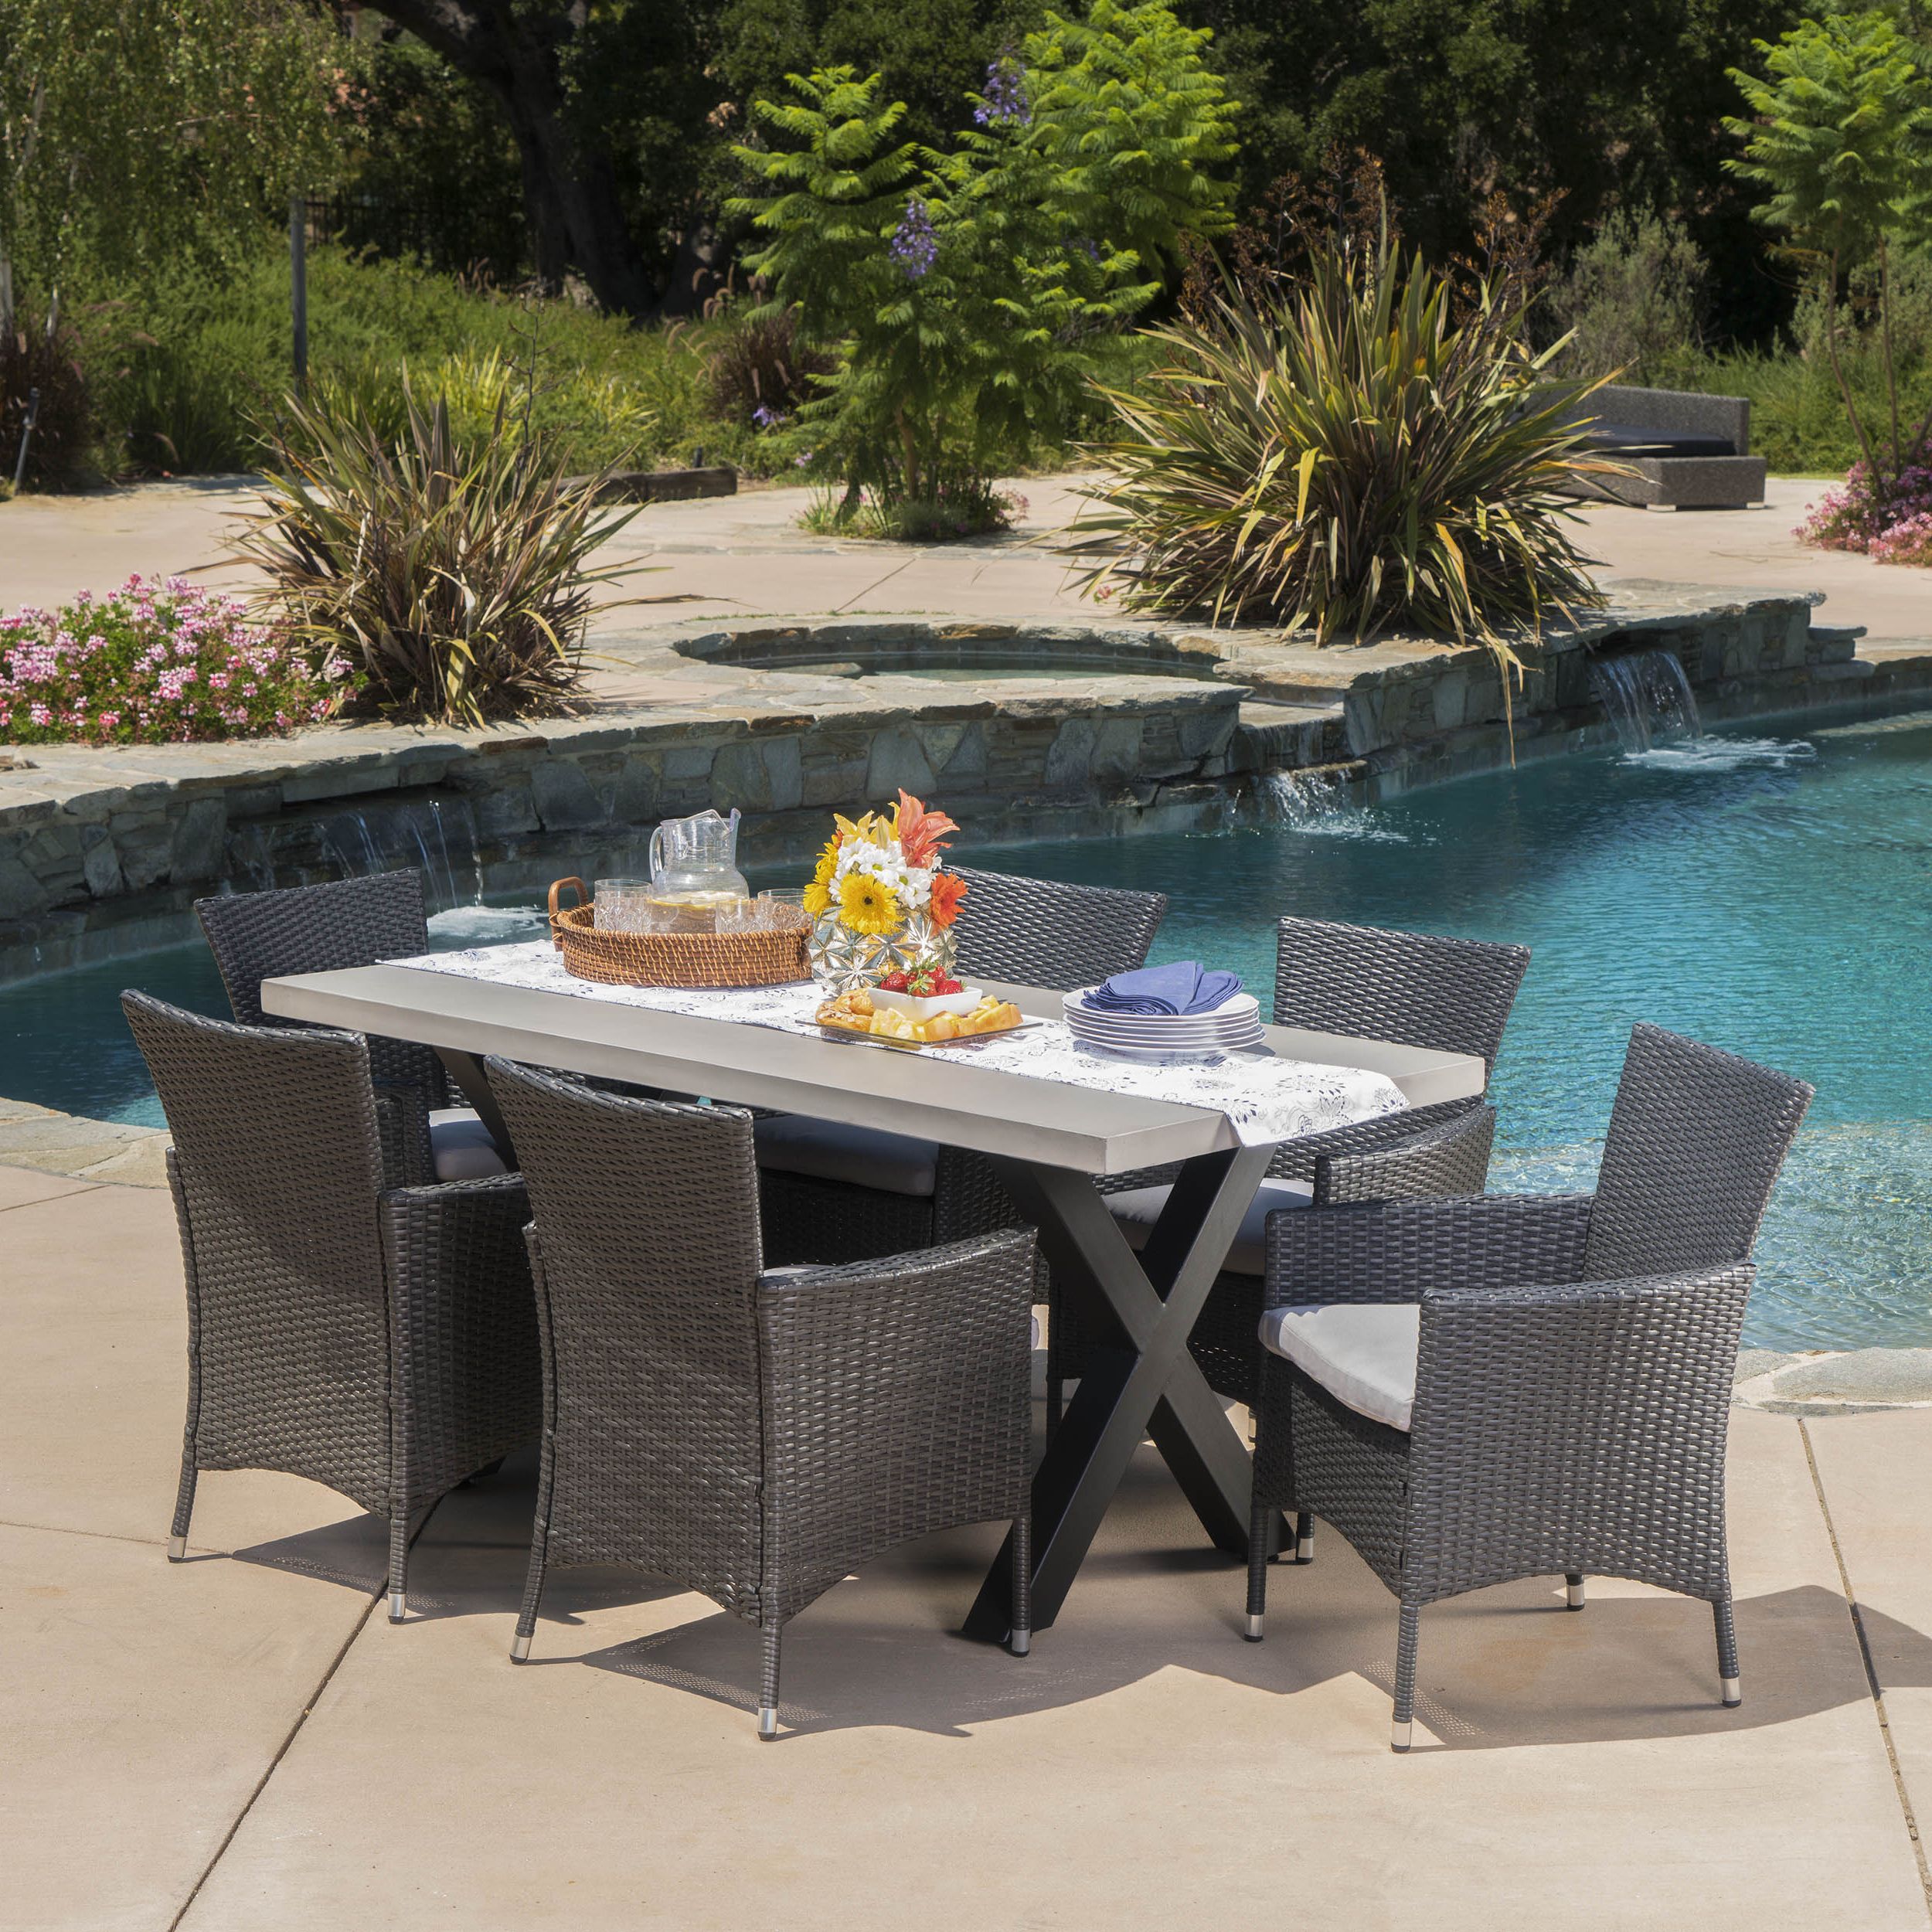 Shiloh Outdoor 7 Piece Dining Set With Concrete Rectangular Table And With Regard To Trendy White Rectangular Patio Dining Sets (View 13 of 15)